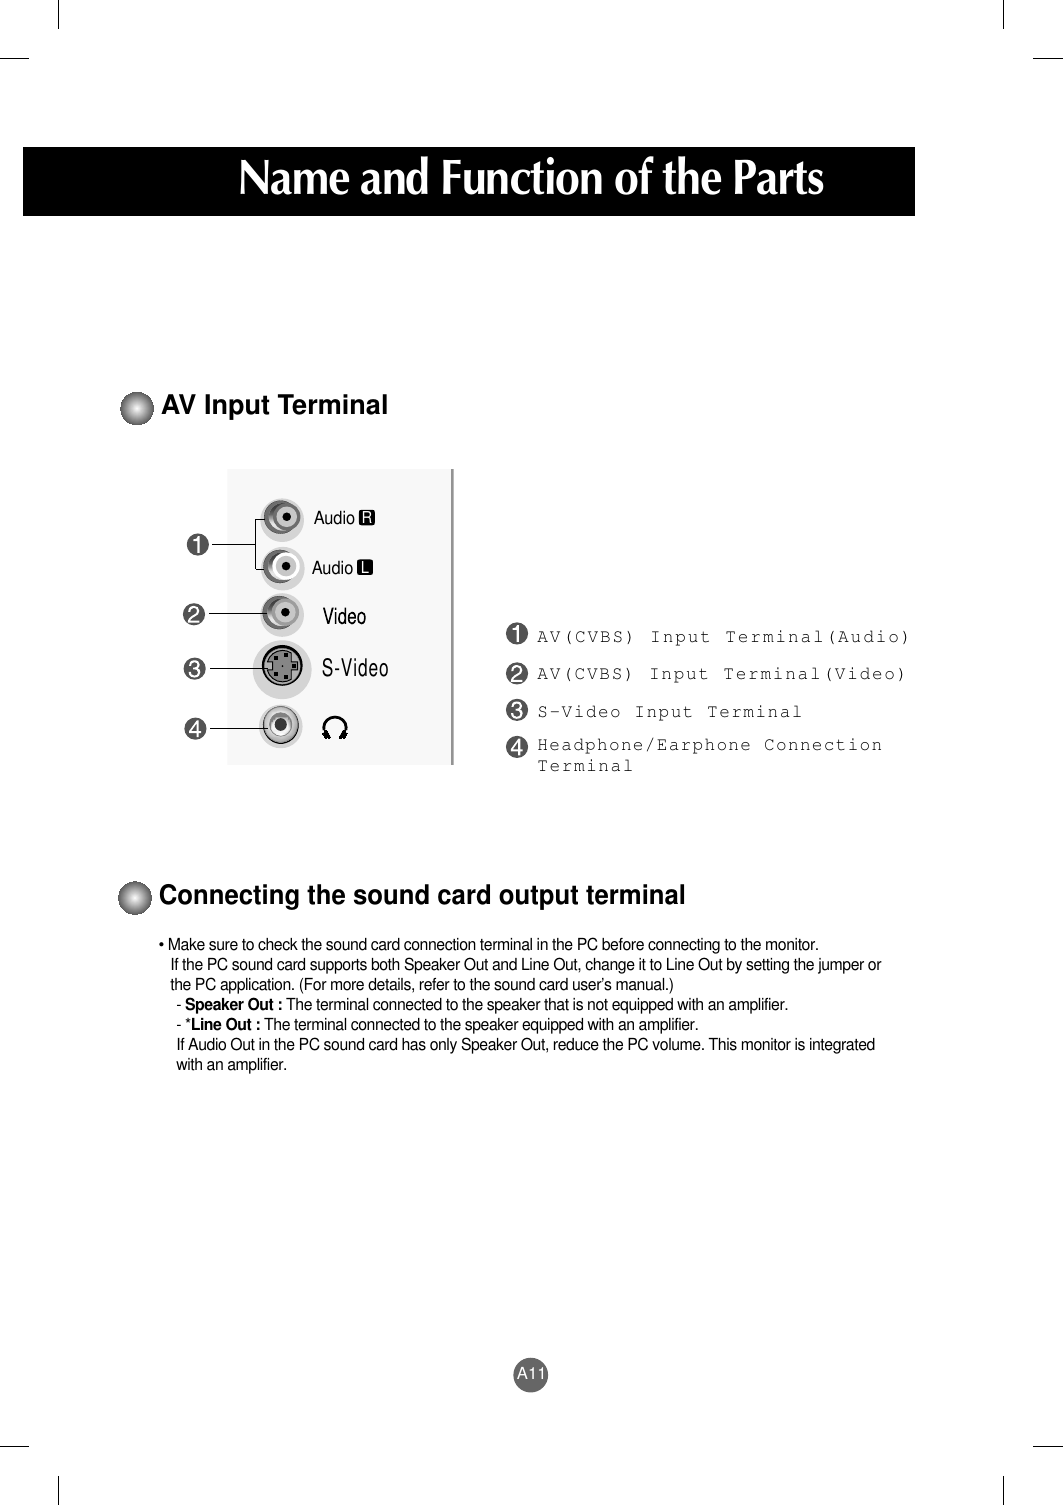 A11Name and Function of the Parts• Make sure to check the sound card connection terminal in the PC before connecting to the monitor.If the PC sound card supports both Speaker Out and Line Out, change it to Line Out by setting the jumper orthe PC application. (For more details, refer to the sound card user’s manual.)- Speaker Out : The terminal connected to the speaker that is not equipped with an amplifier.- *Line Out : The terminal connected to the speaker equipped with an amplifier.If Audio Out in the PC sound card has only Speaker Out, reduce the PC volume. This monitor is integratedwith an amplifier.AV Input TerminalConnecting the sound card output terminalAudioRAudioLS-VideoAV(CVBS) Input Terminal(Audio)AV(CVBS) Input Terminal(Video)S-Video Input TerminalHeadphone/Earphone ConnectionTerminal